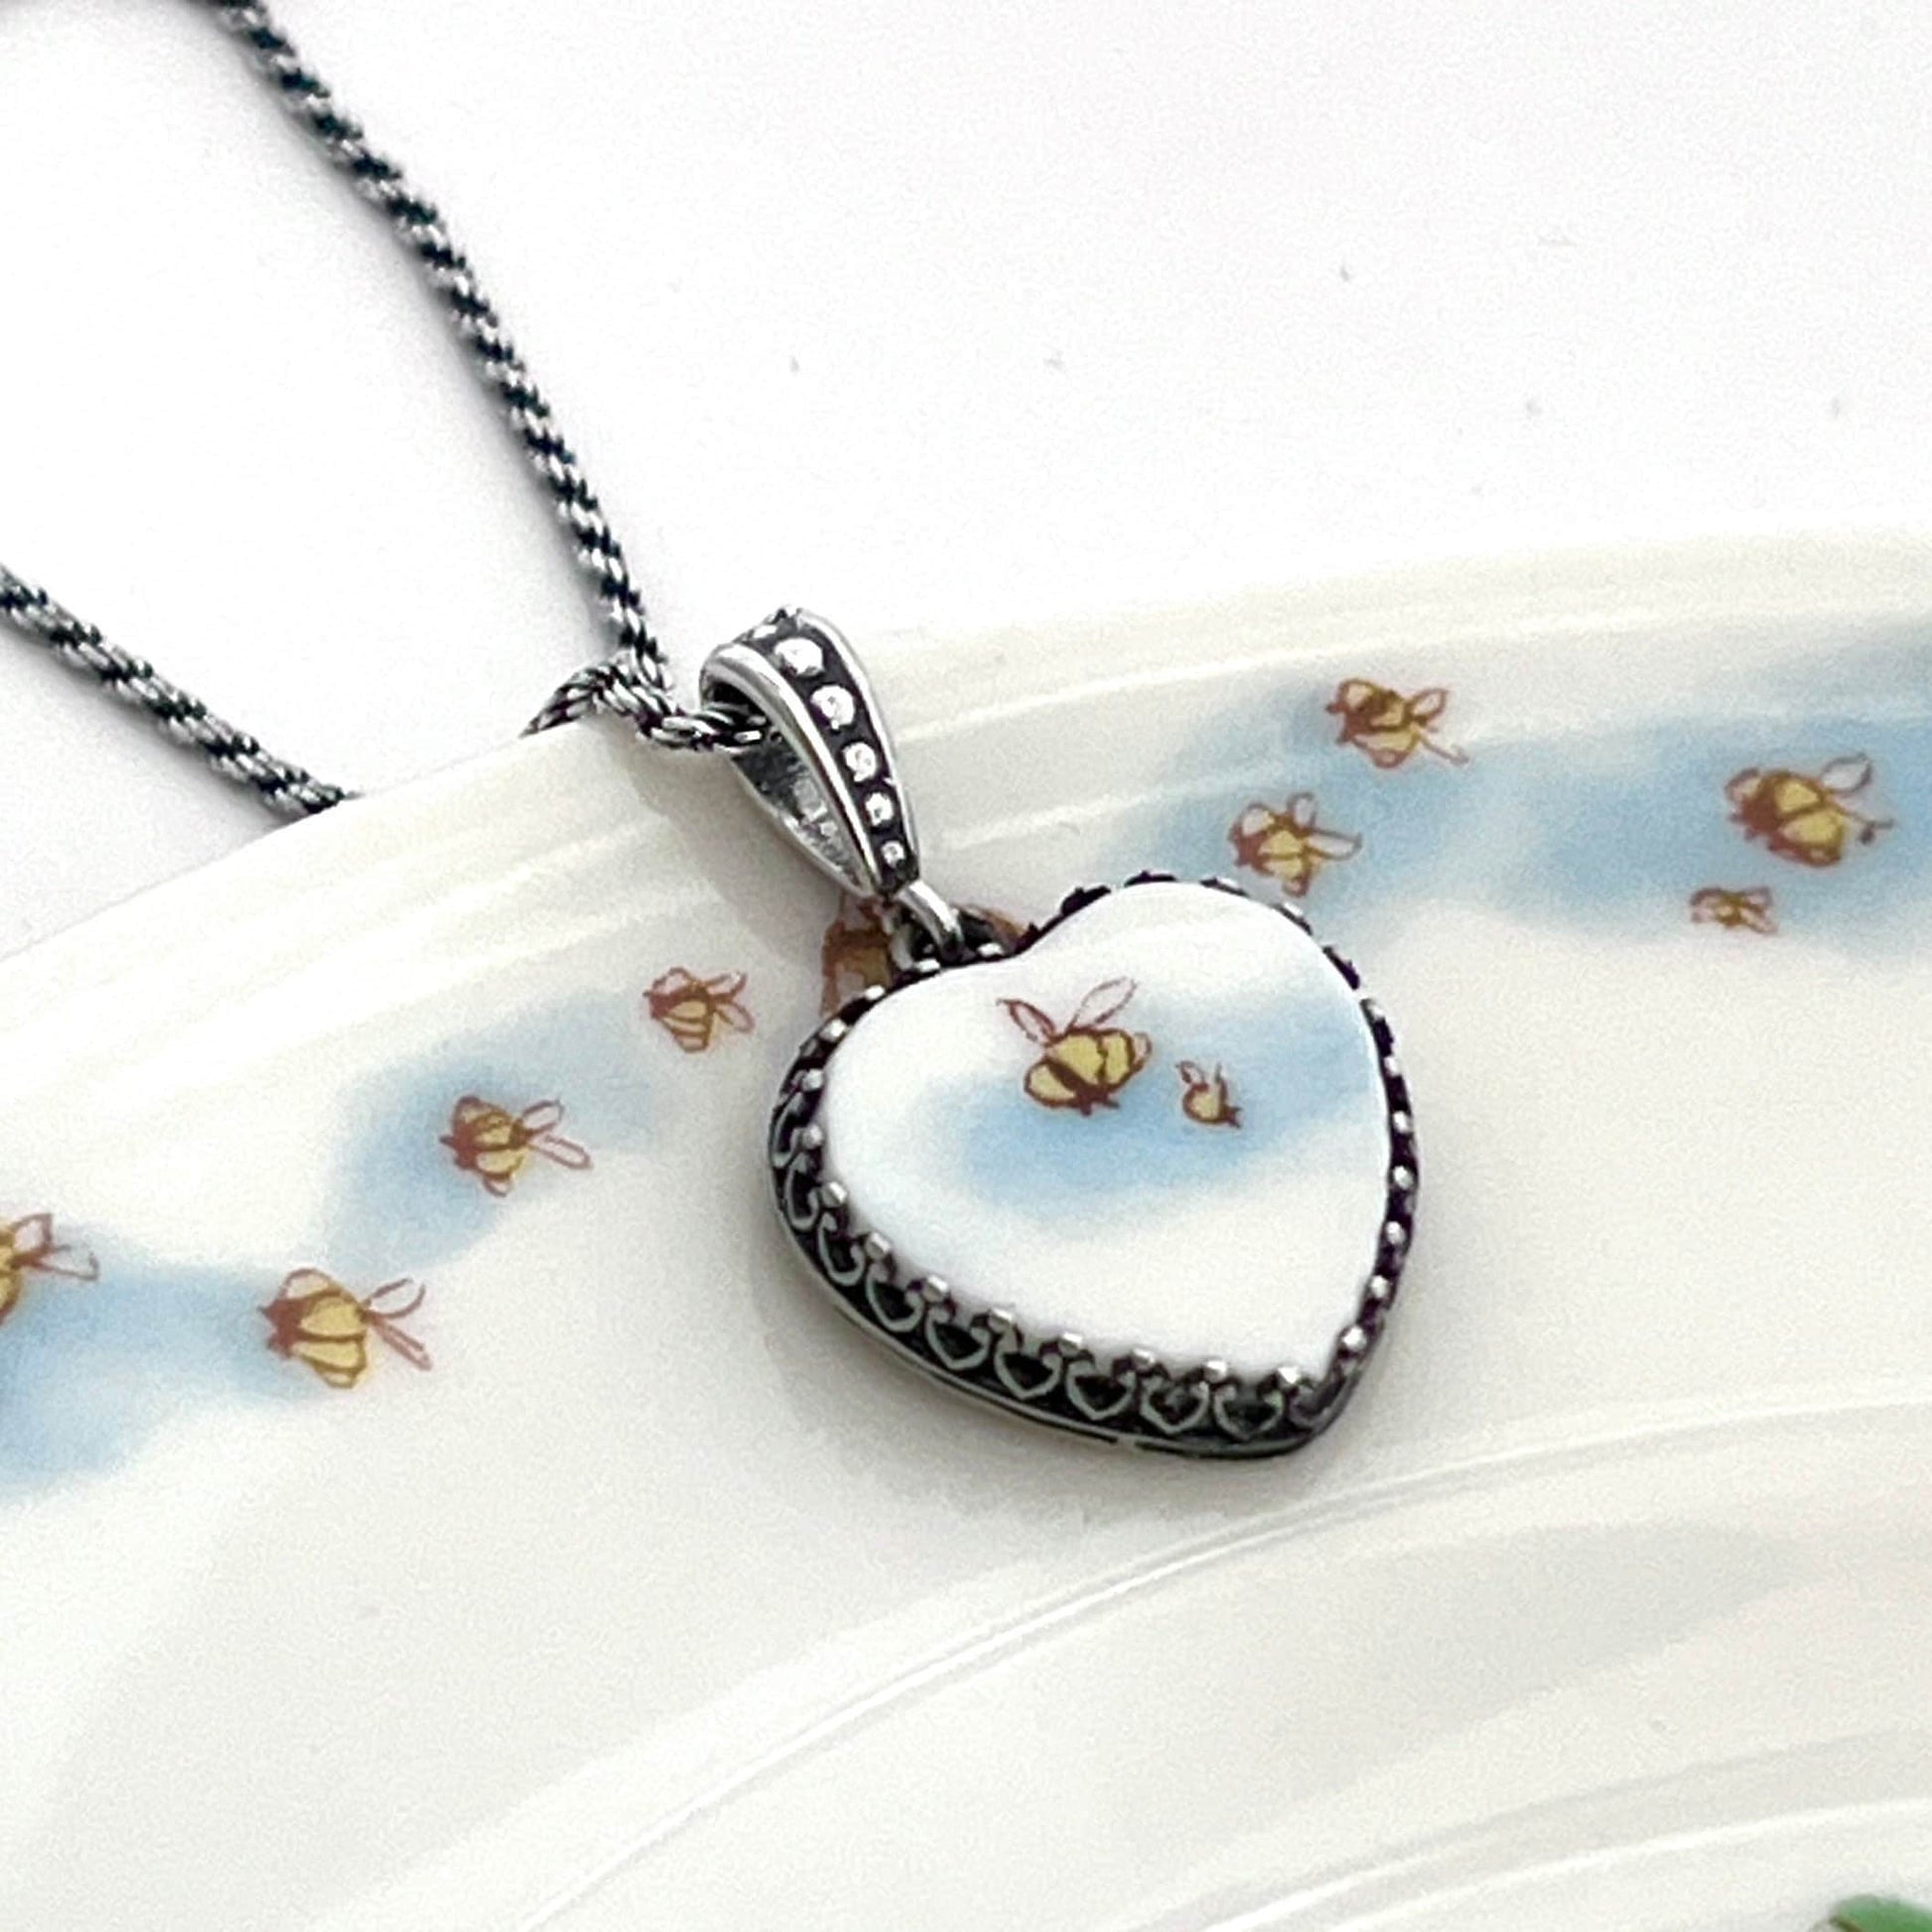 Dainty Bee Necklace, Broken China Jewelry Honey Bee Necklace, Sterling Silver Heart Jewelry